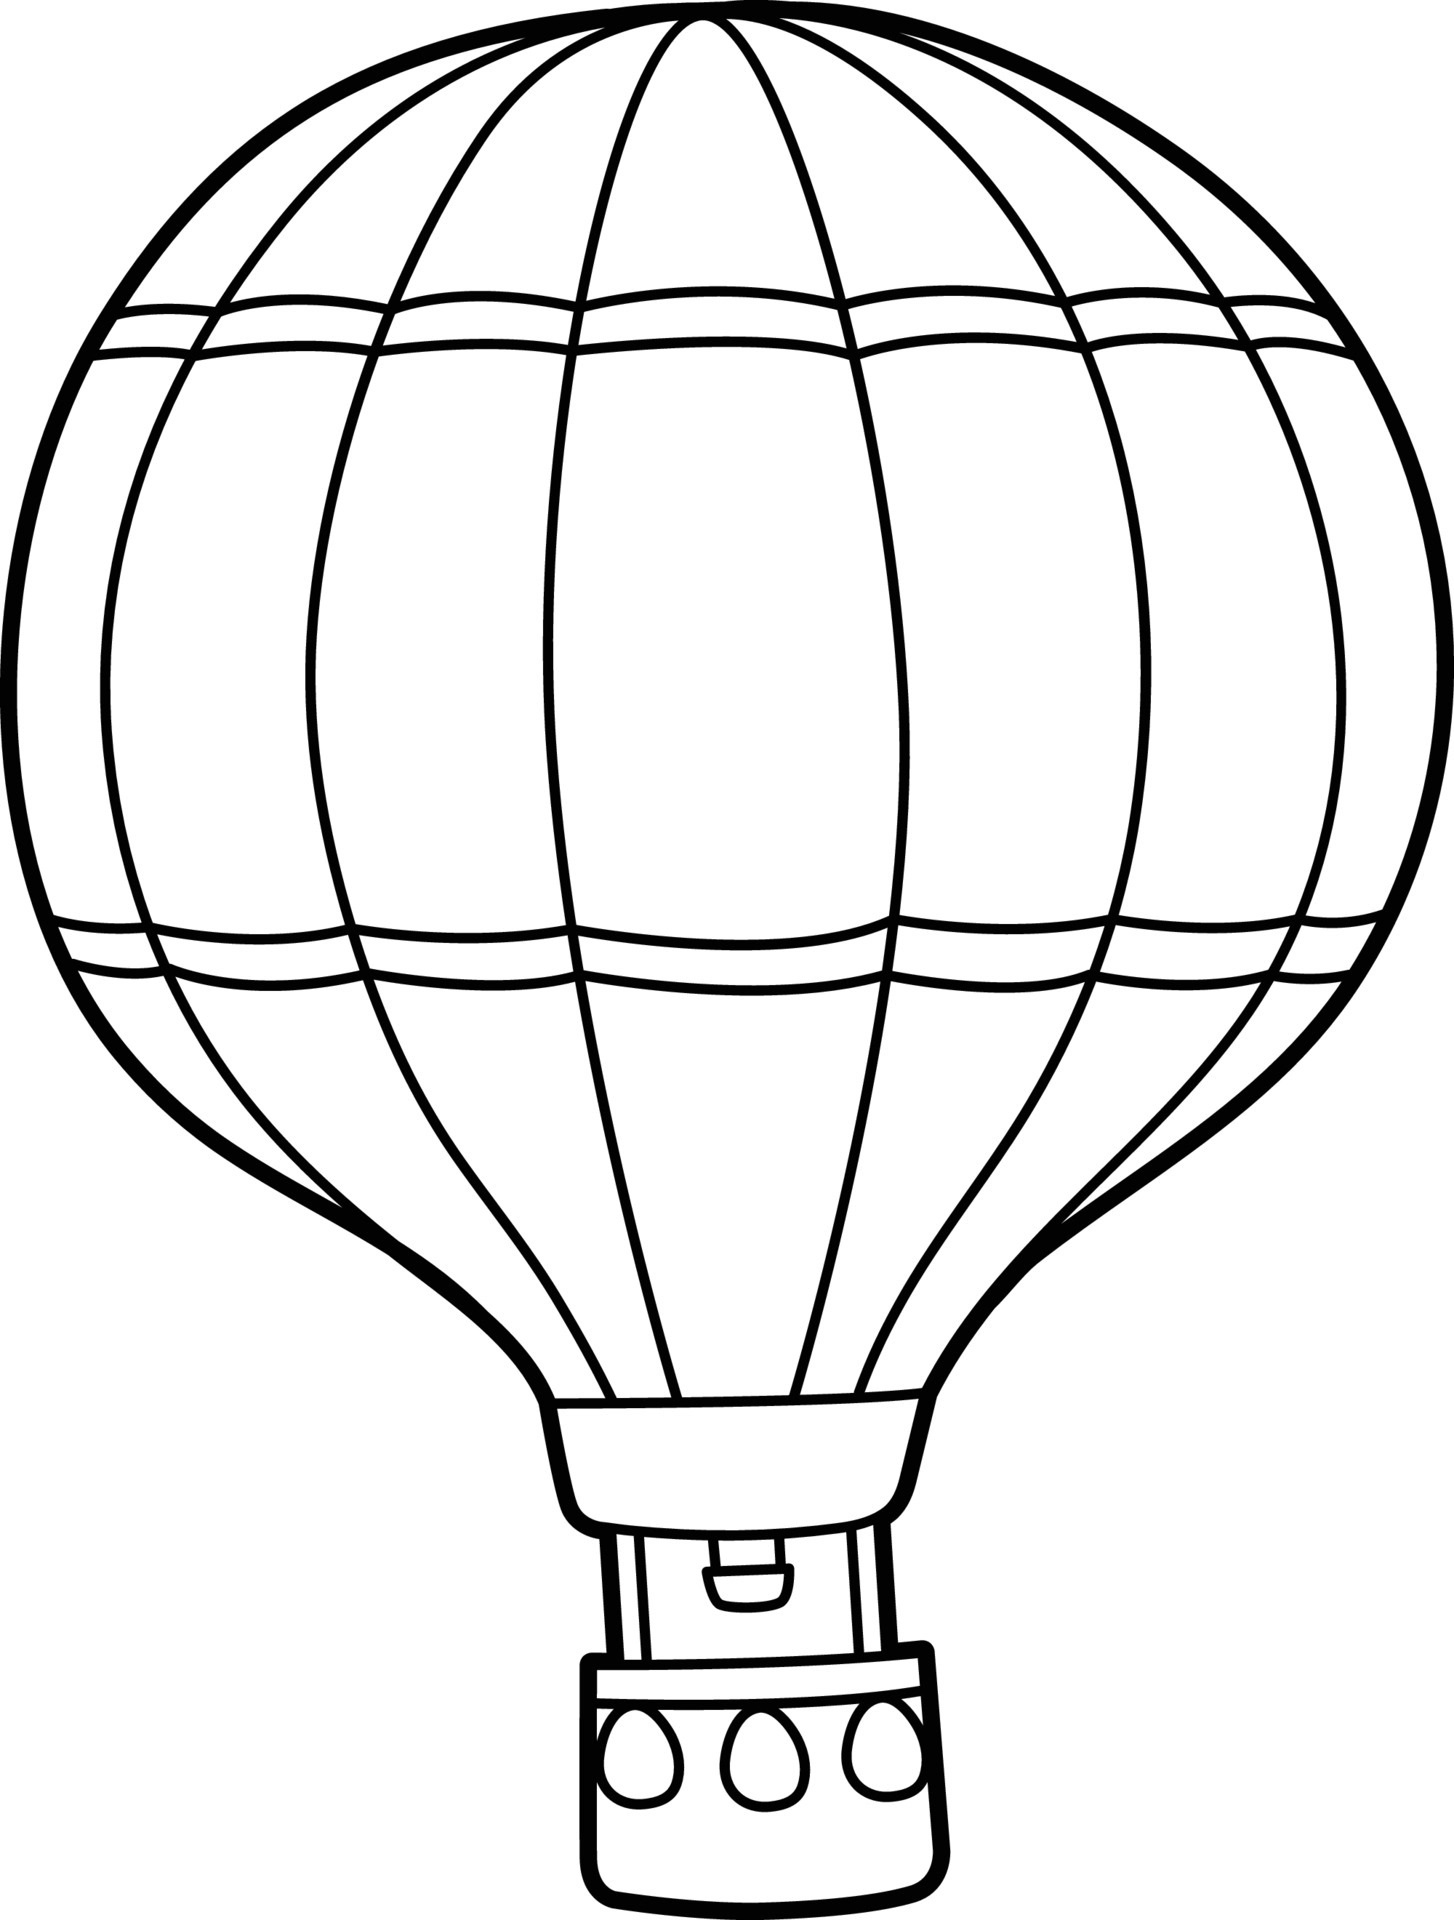 Hot Air Balloon Coloring Page And Coloring Book